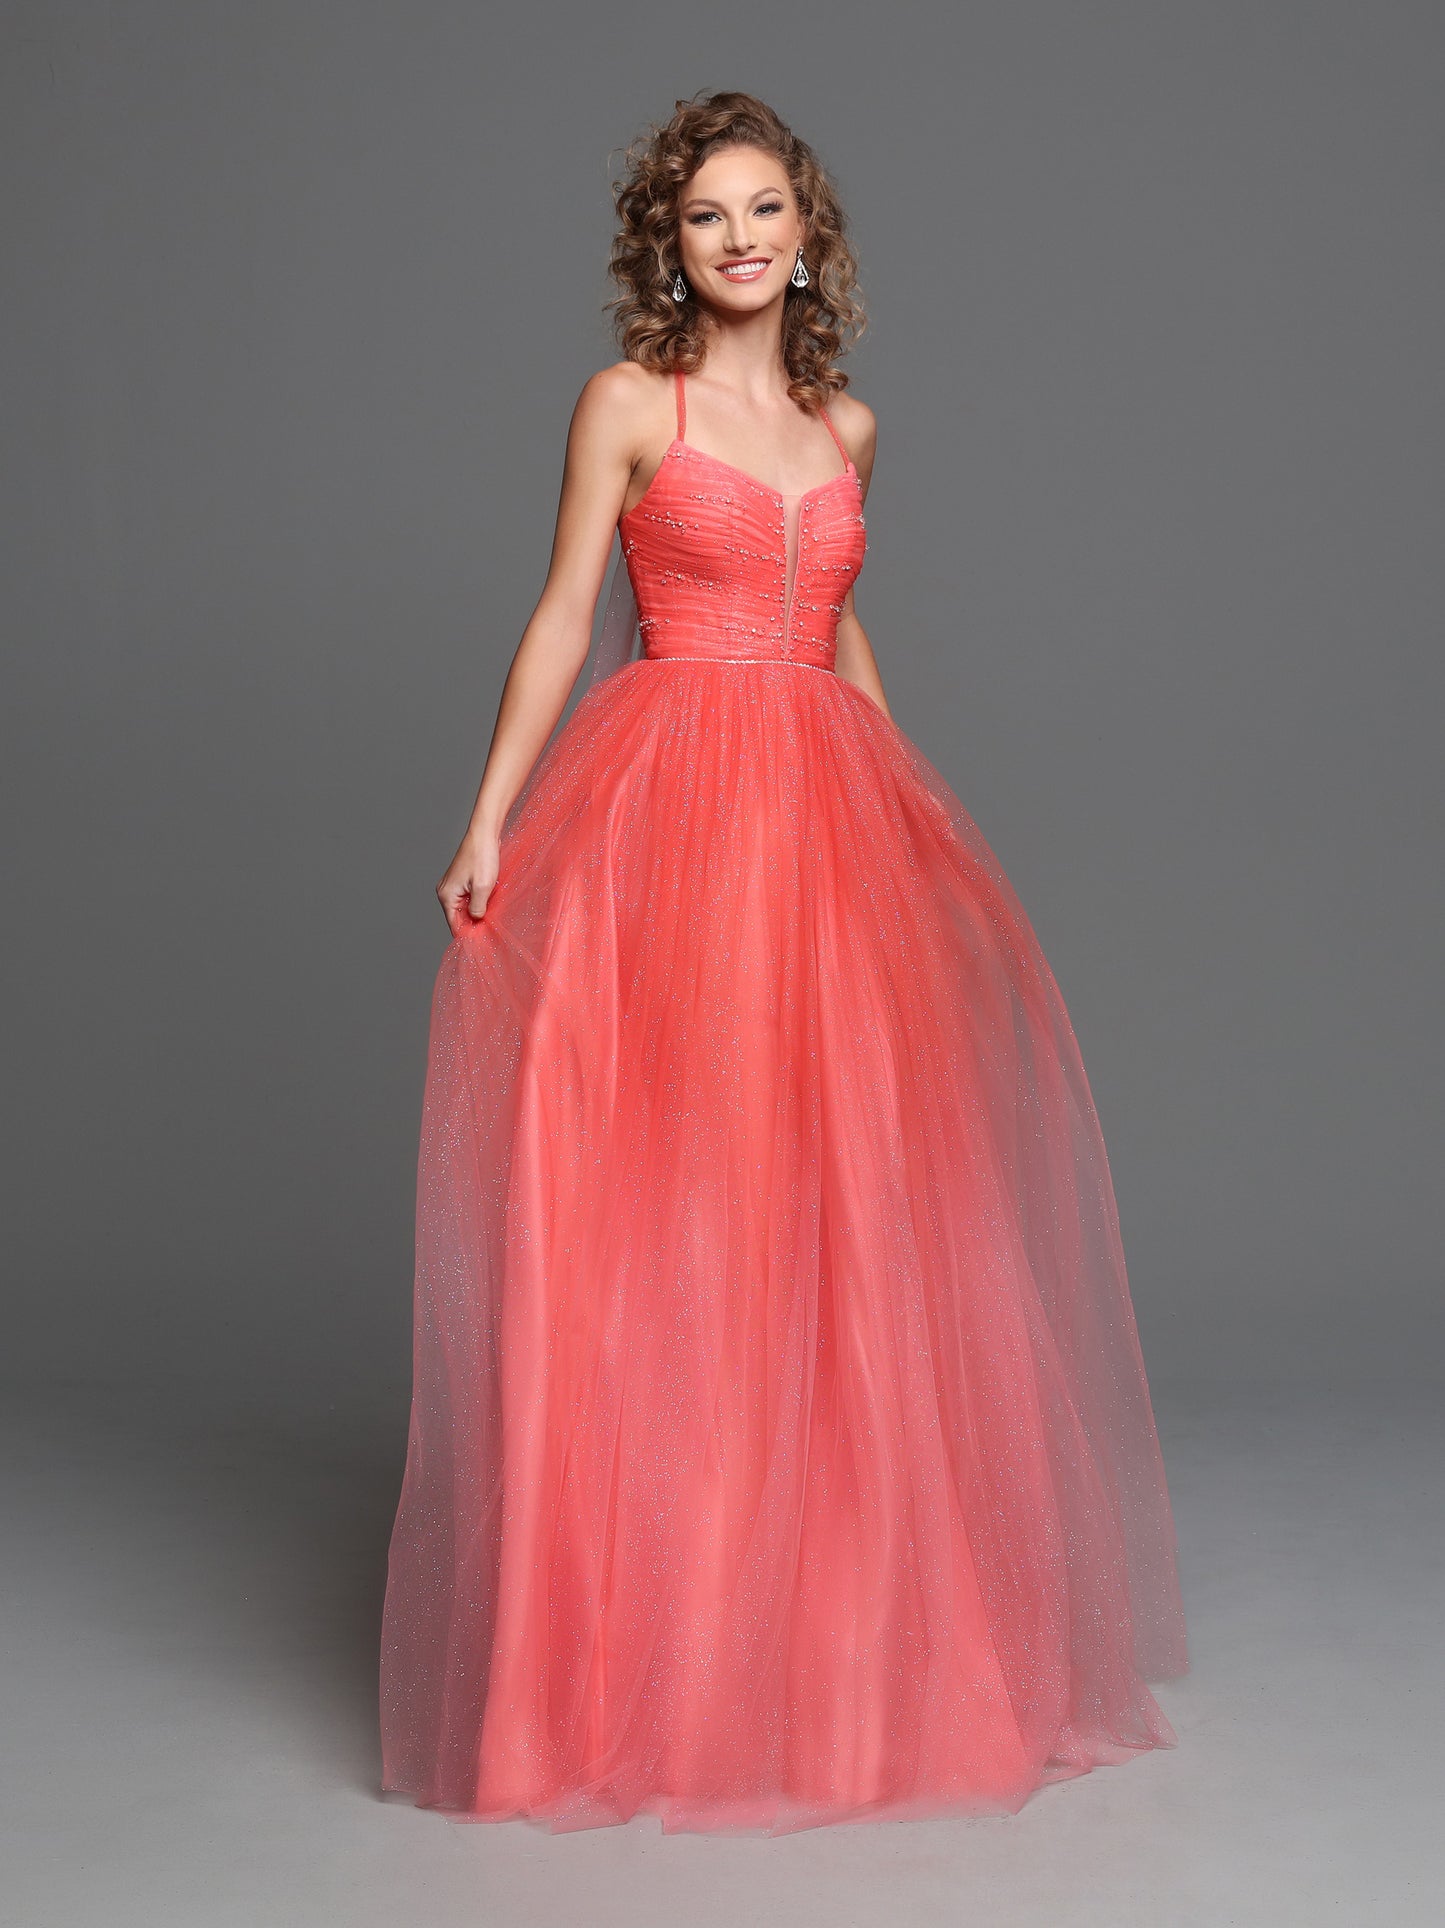 Sparkle Prom 72242 Long Orange Shimmer A Line Prom Dress Halter Ballgown Princess style ruched bodice with beaded Rhinestone waistline and scattered embellishments across the gowns top. Plunging sheer illusion v neckline with peak points.  Colors: Orange  Sizes: 0-20